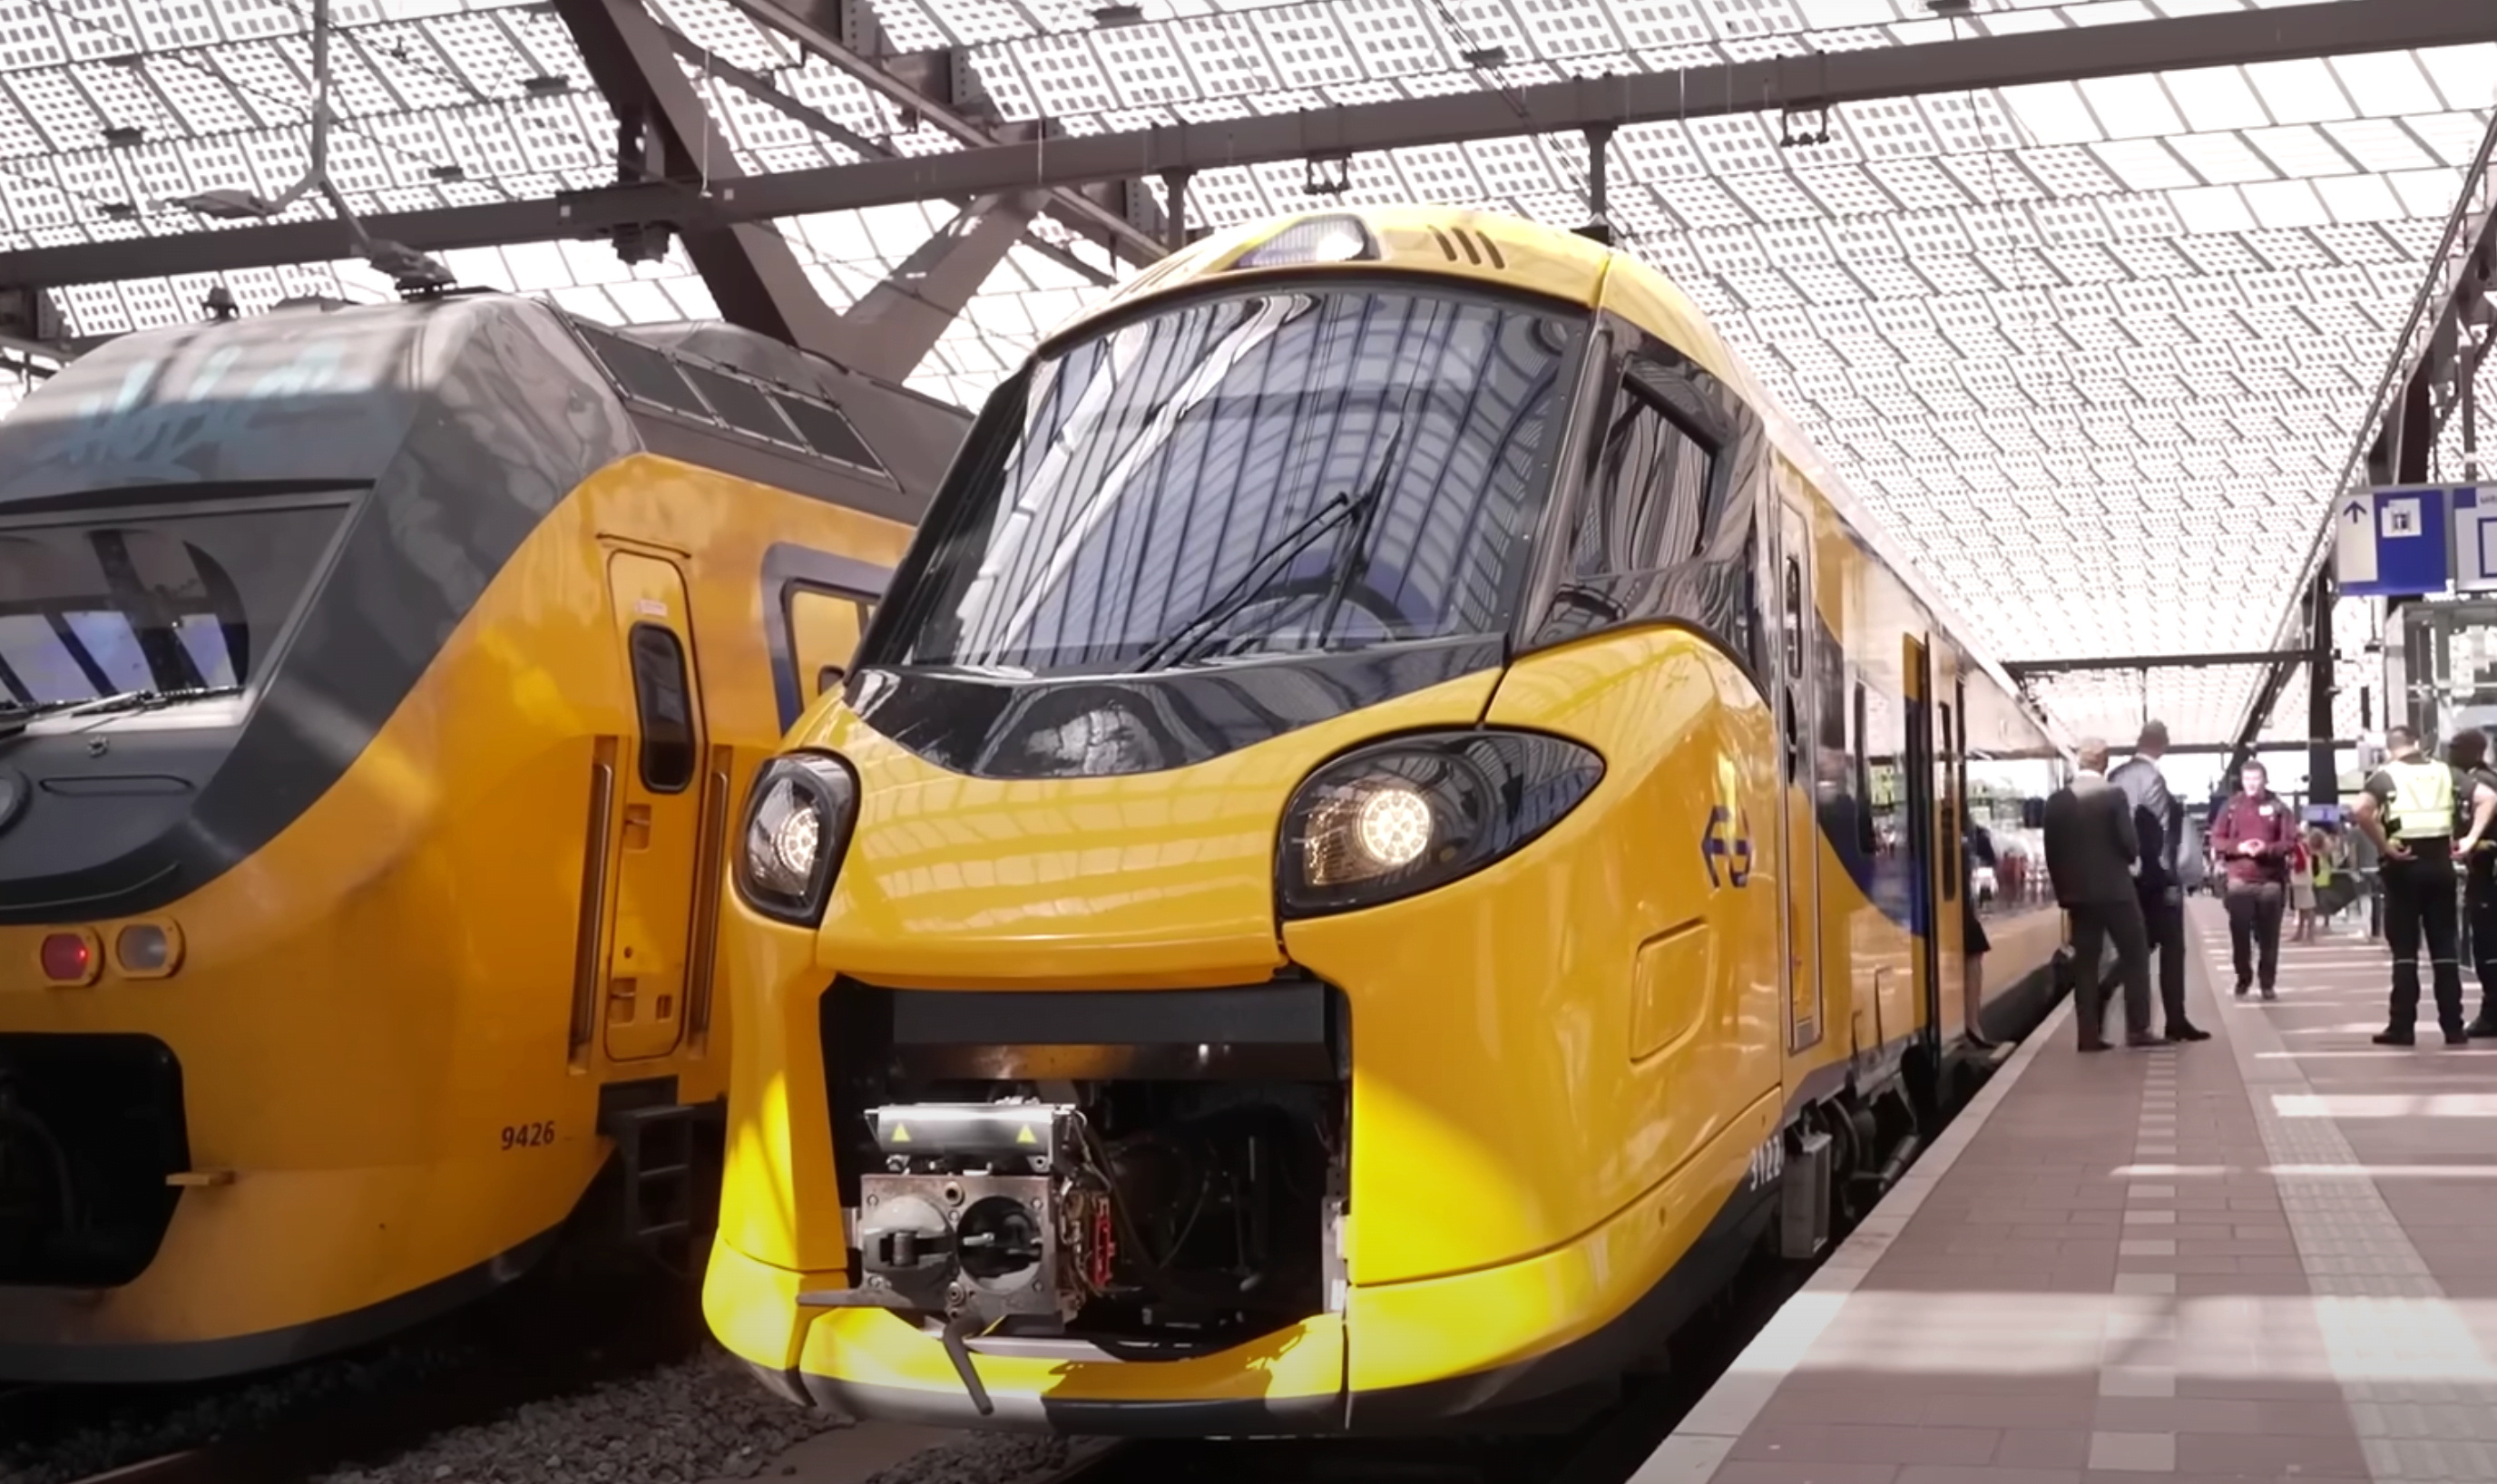 New Intercity approved for Dutch rail